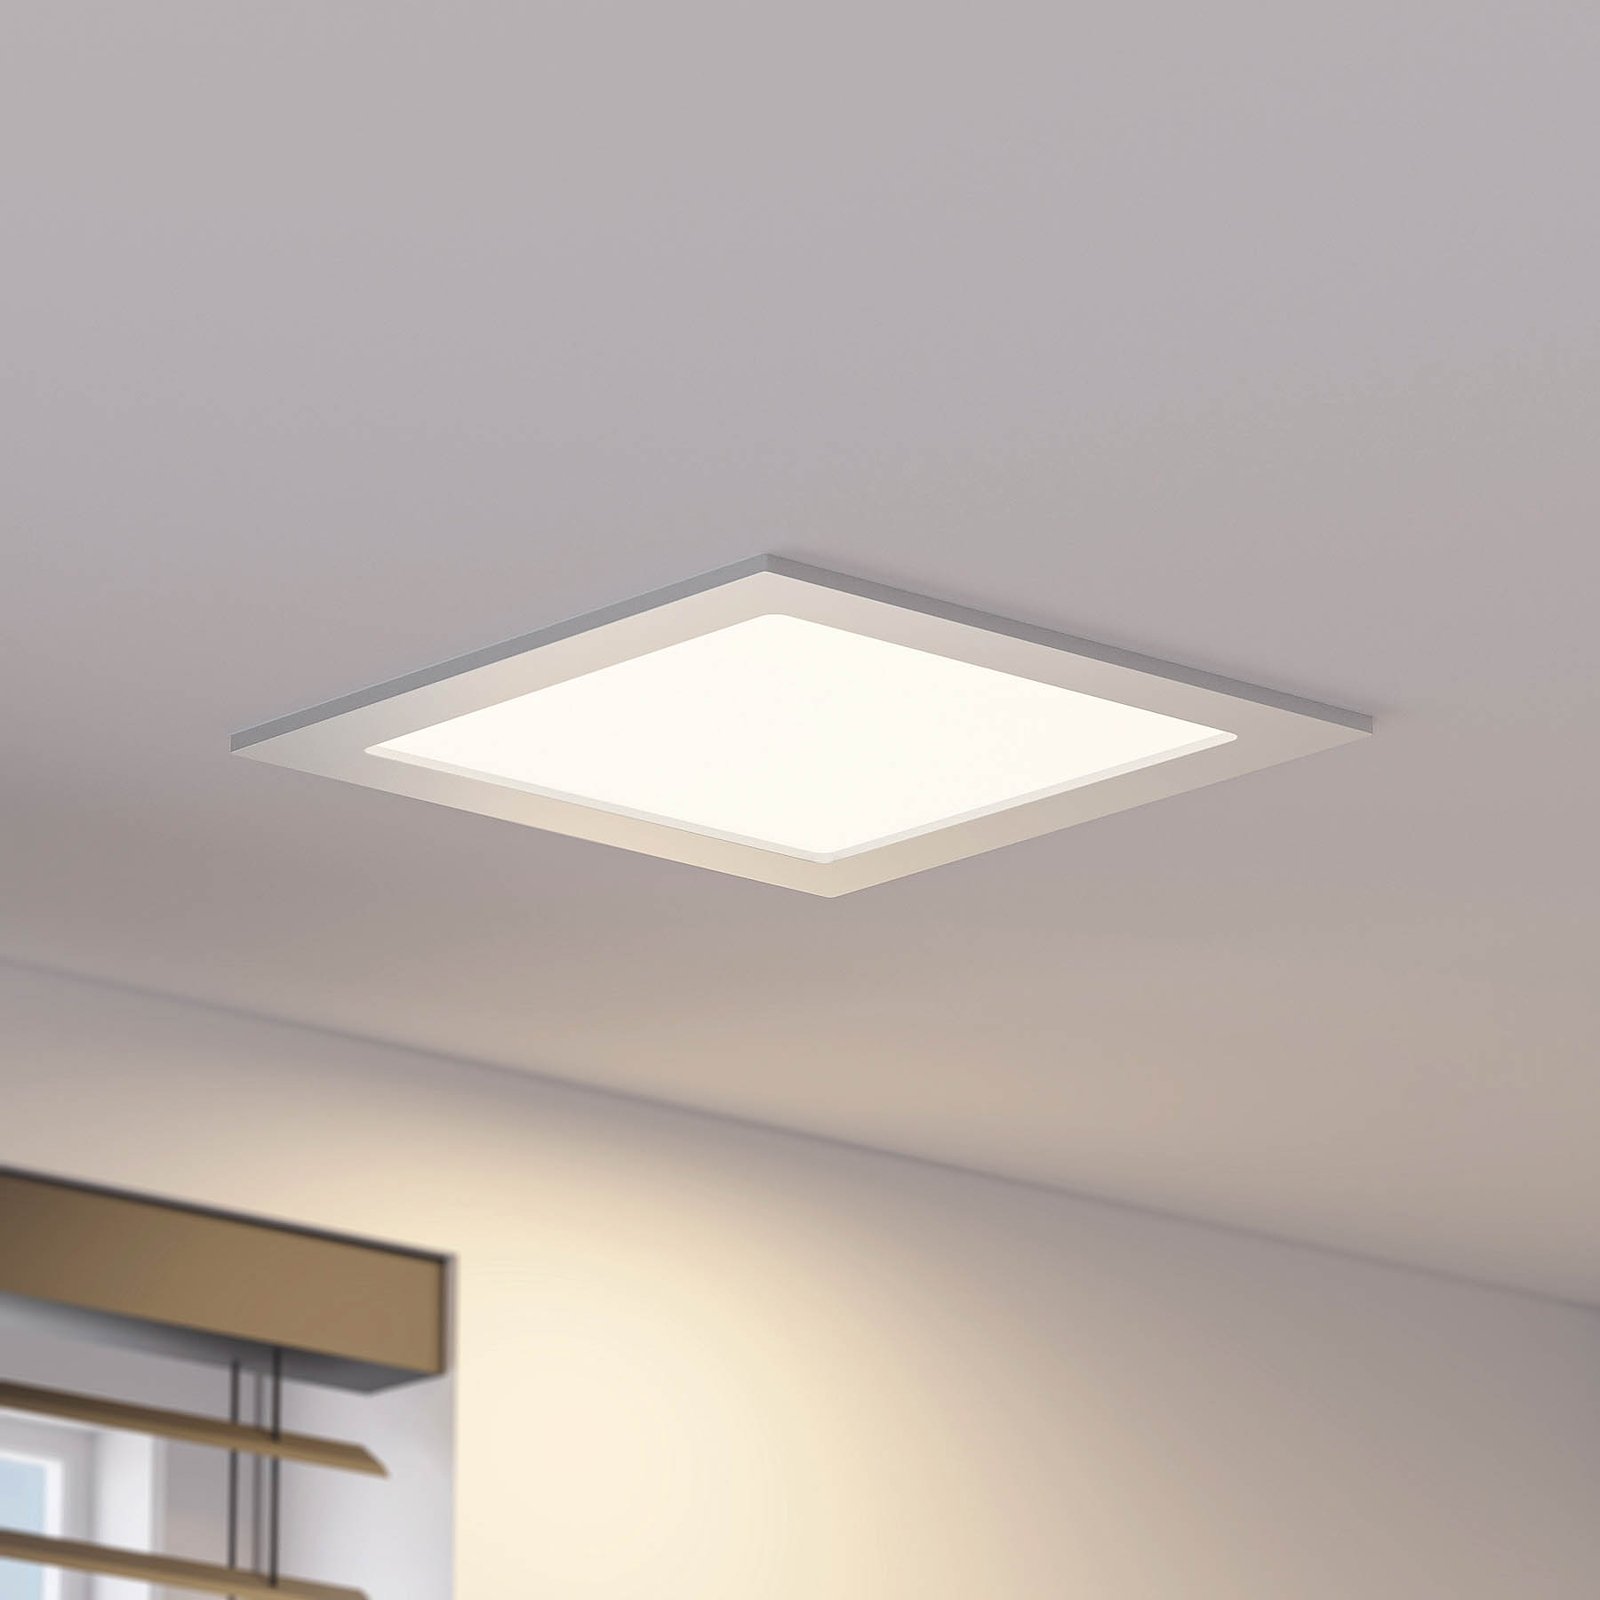 Prios Helina LED recessed light, silver 22 cm 24 W